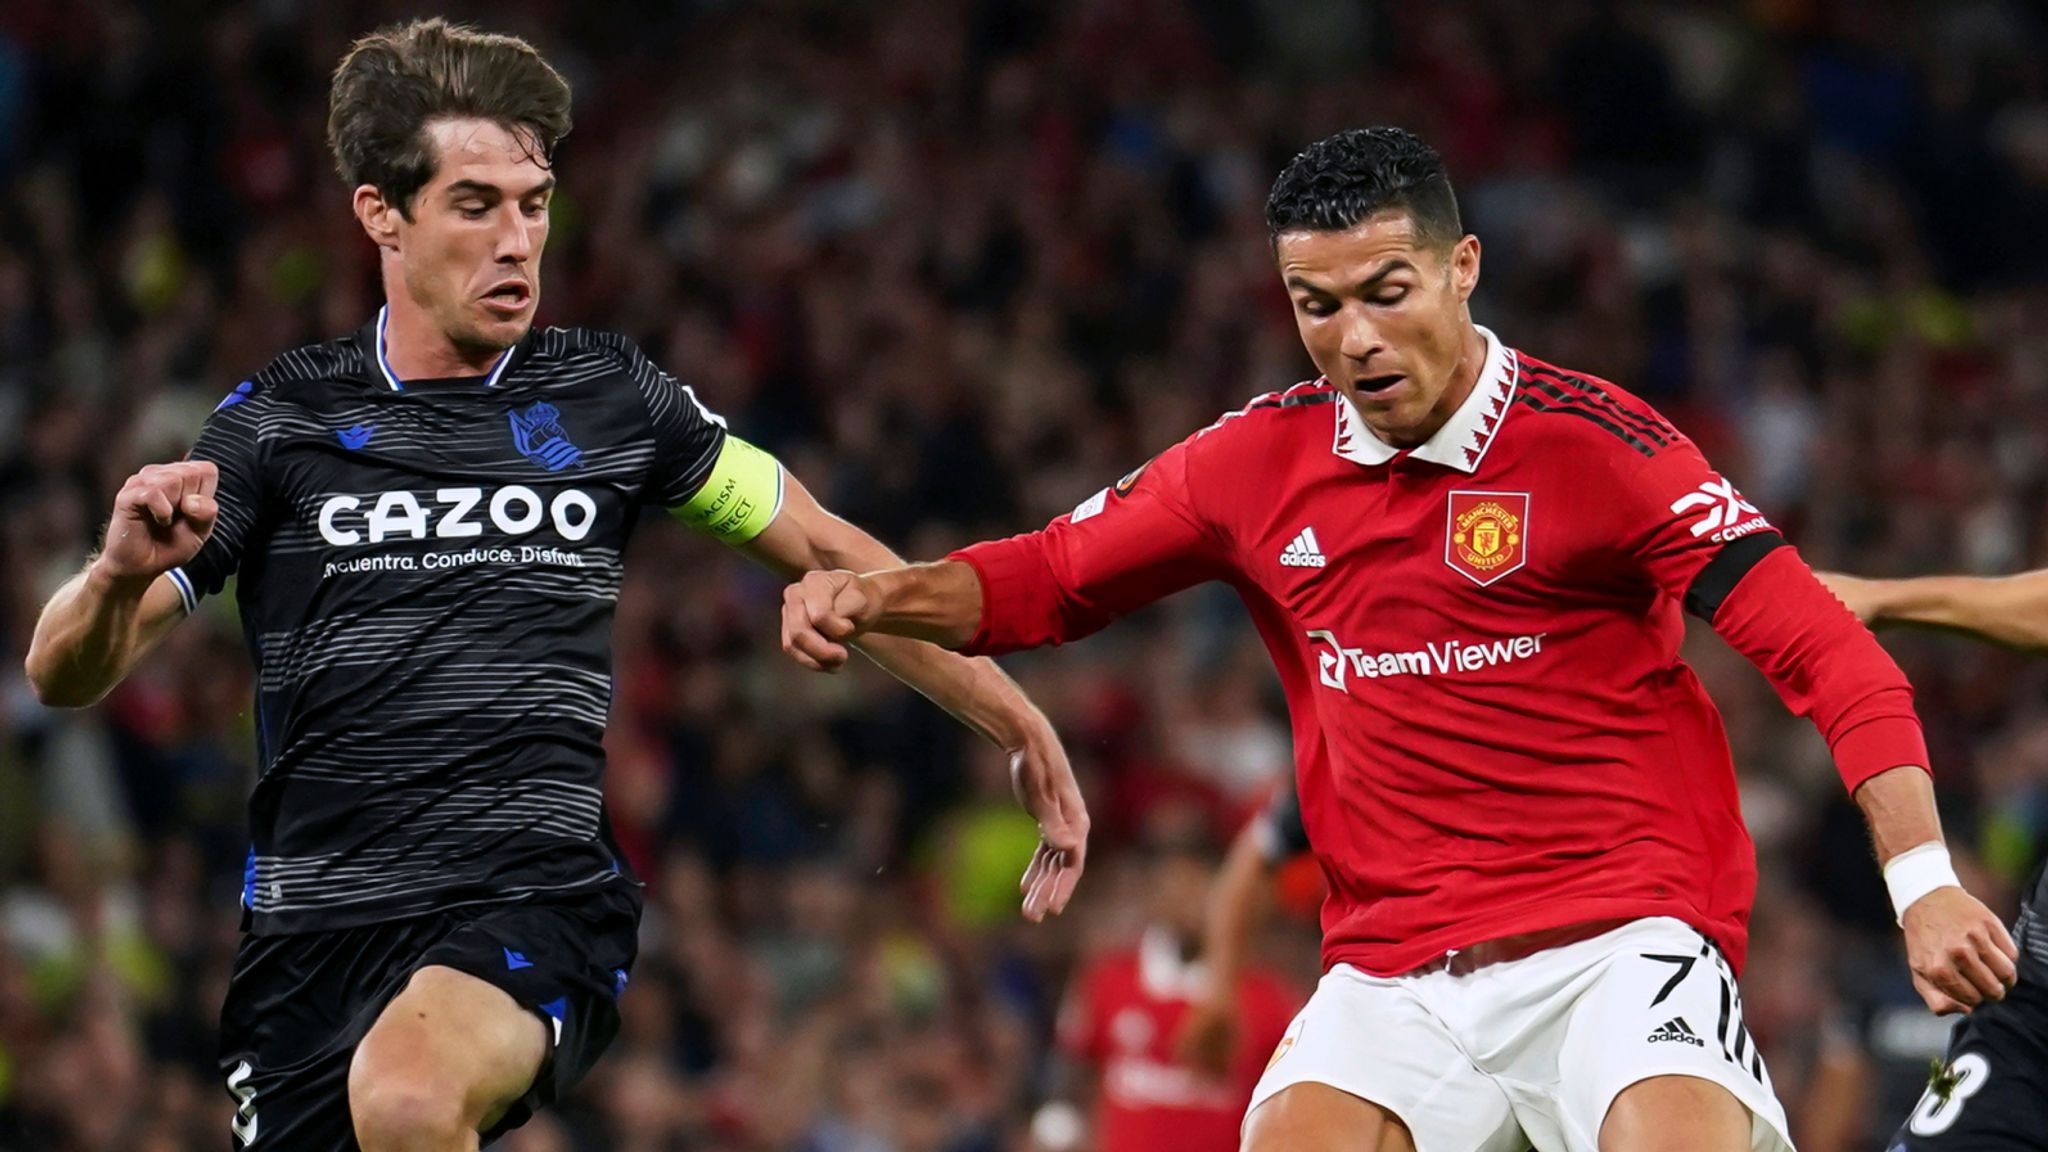 Manchester United 0-1 Real Sociedad: Controversial penalty gives